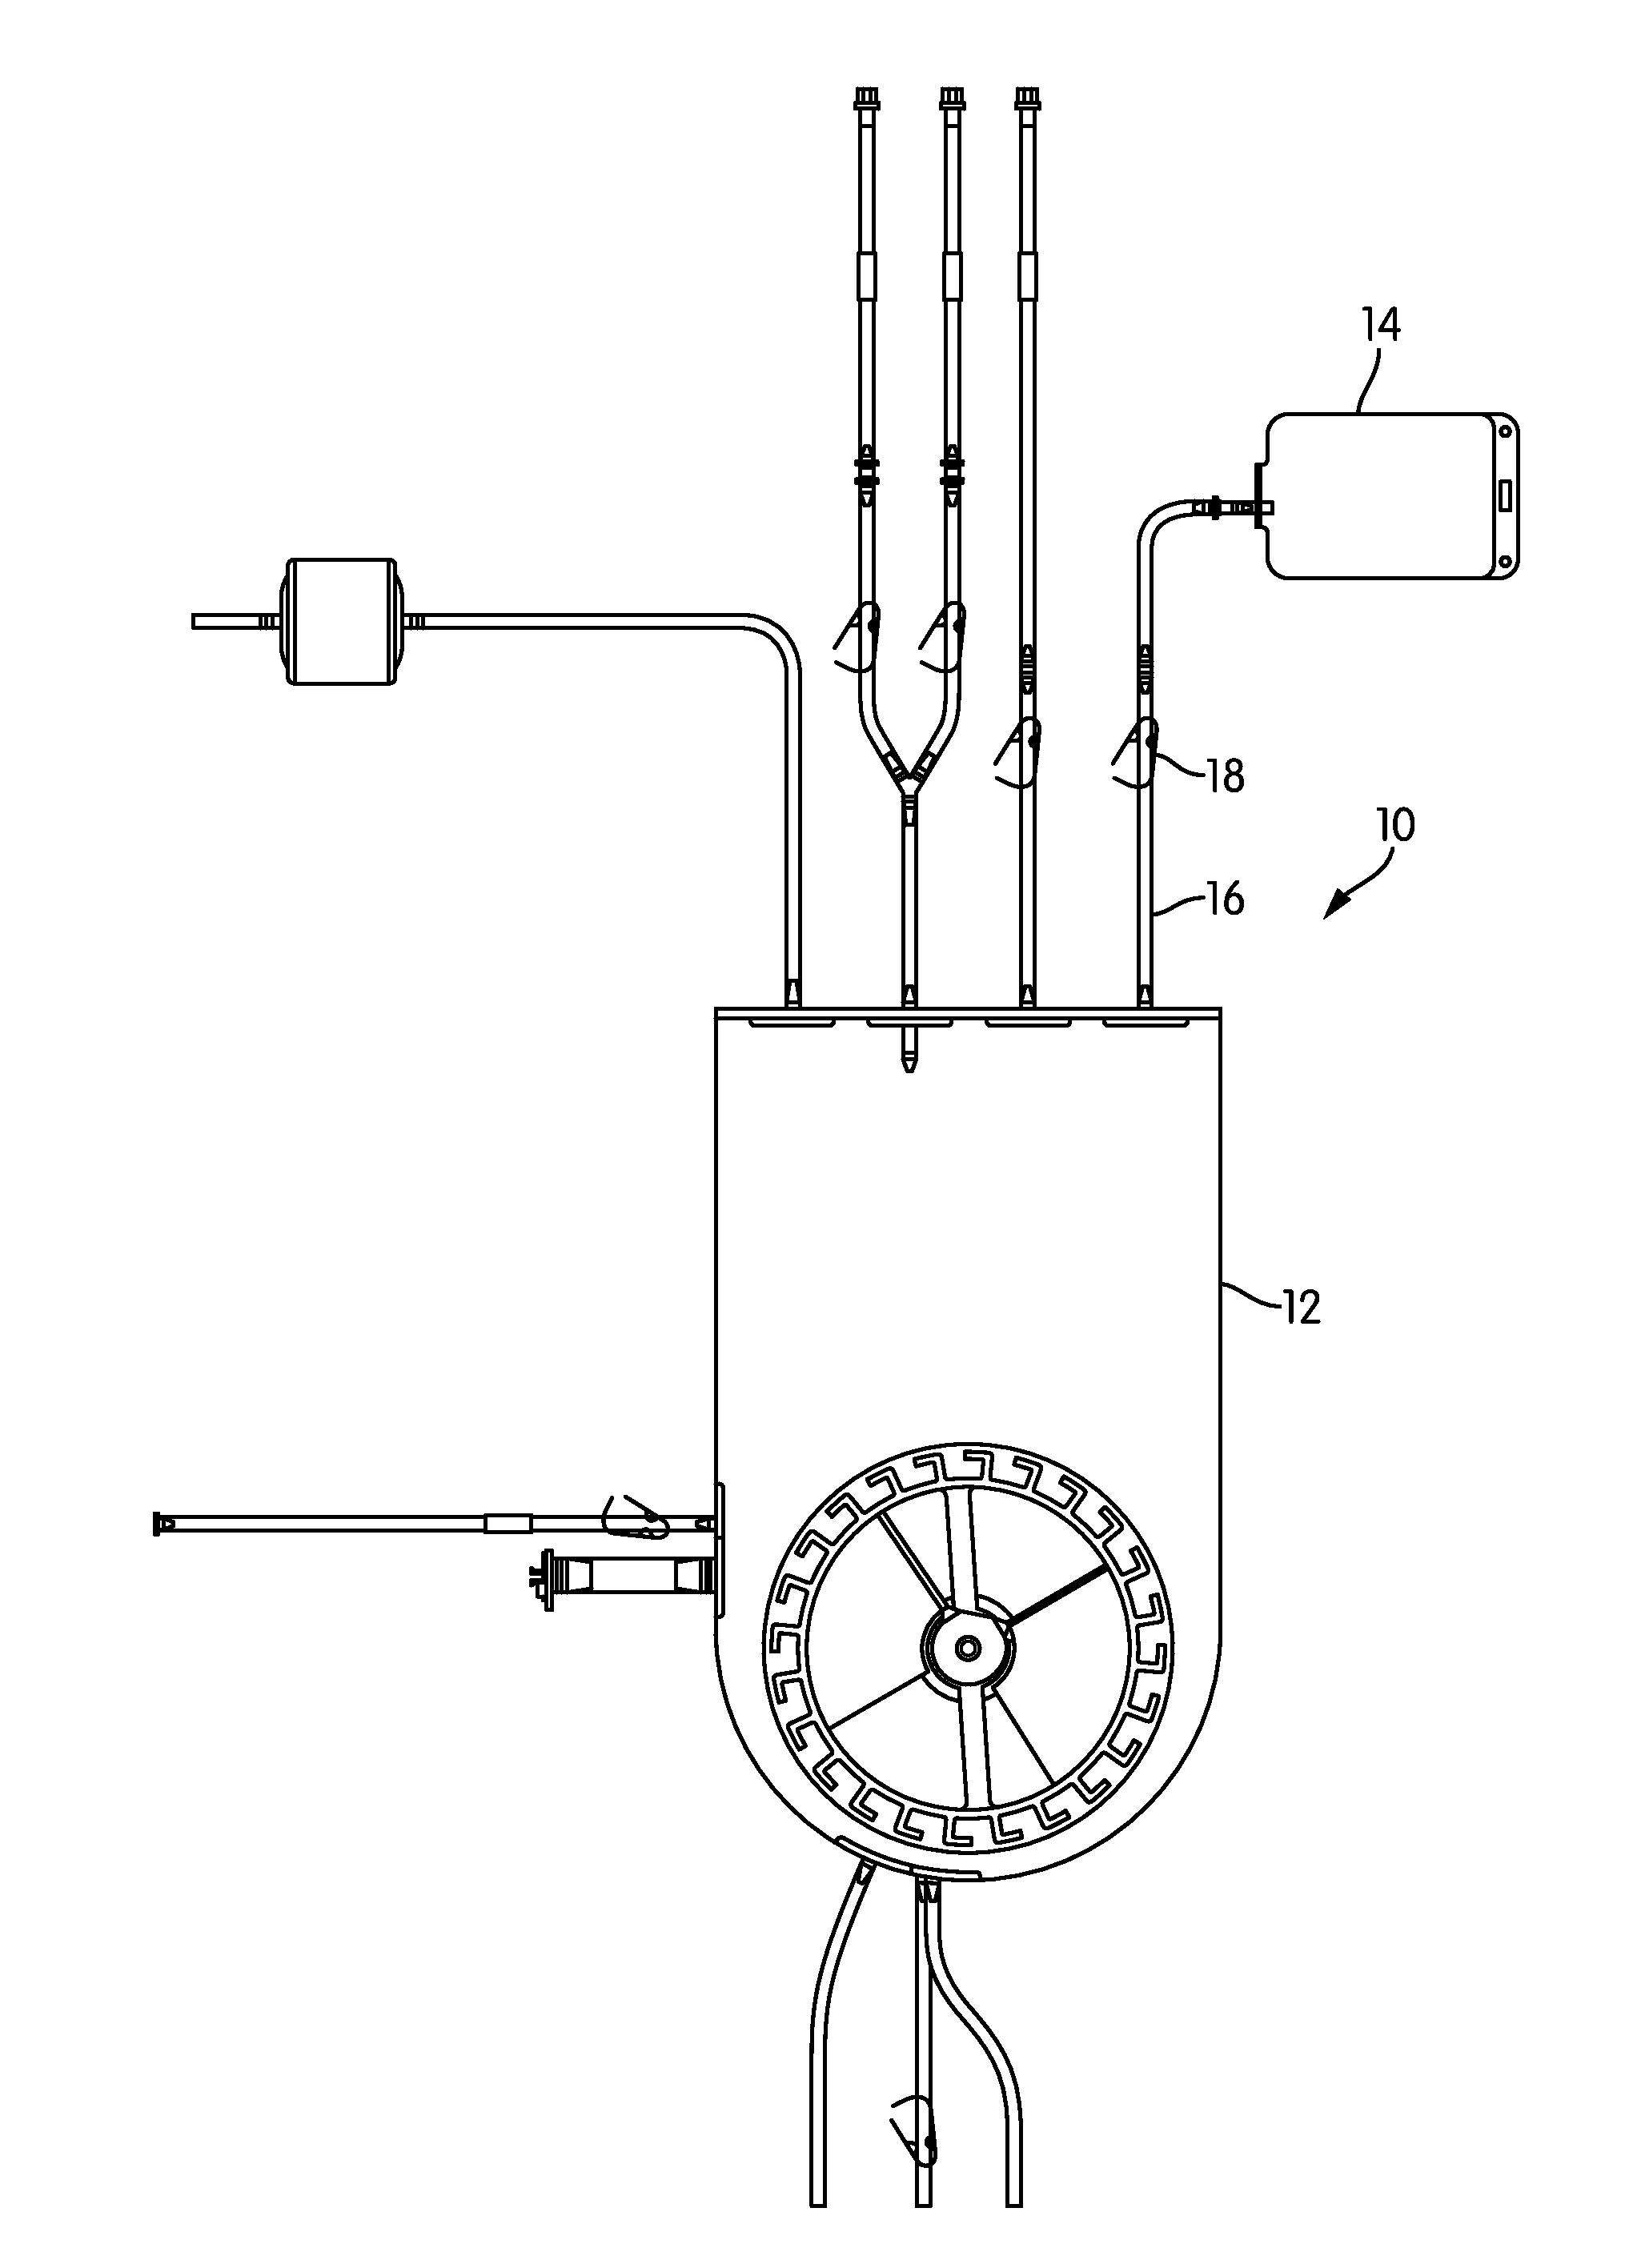 Method and apparatus for the use of micro-carriers in a disposable bioreactor system